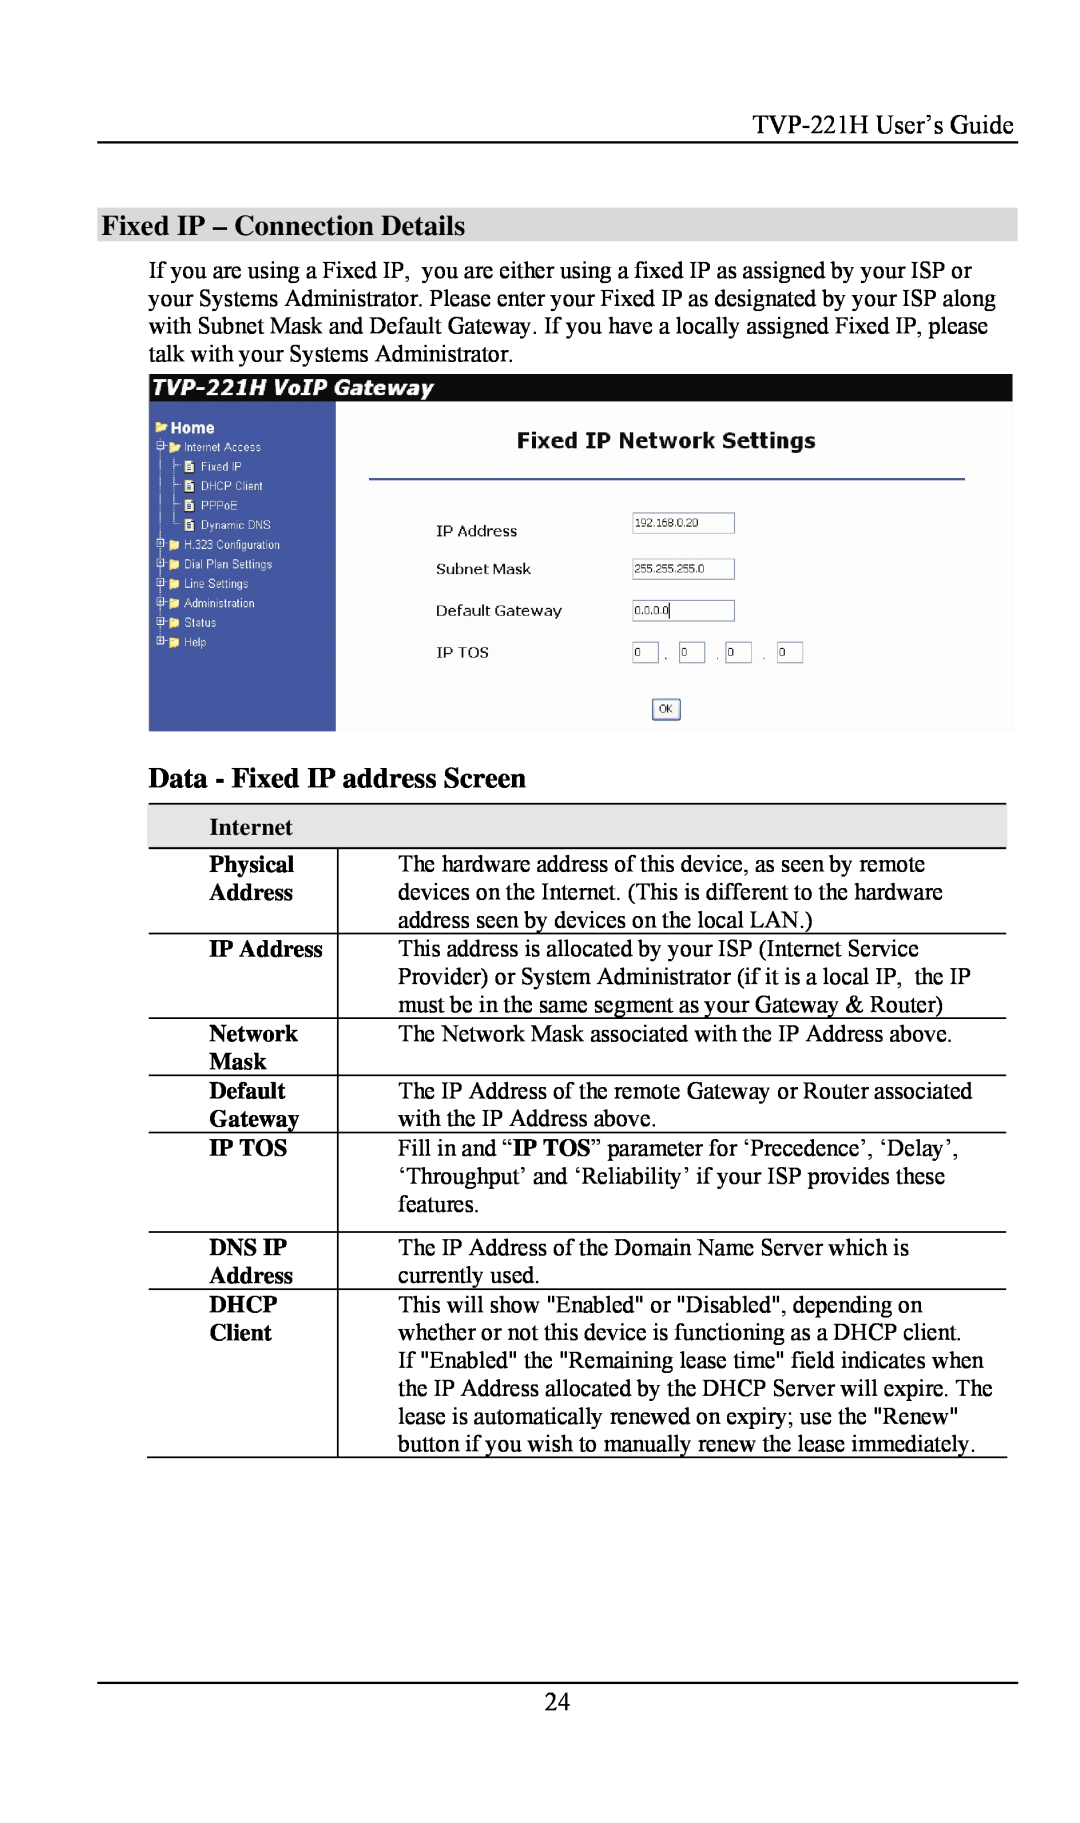 TRENDnet TVP- 221H, VoIP Gateway manual Fixed IP - Connection Details, Data - Fixed IP address Screen 